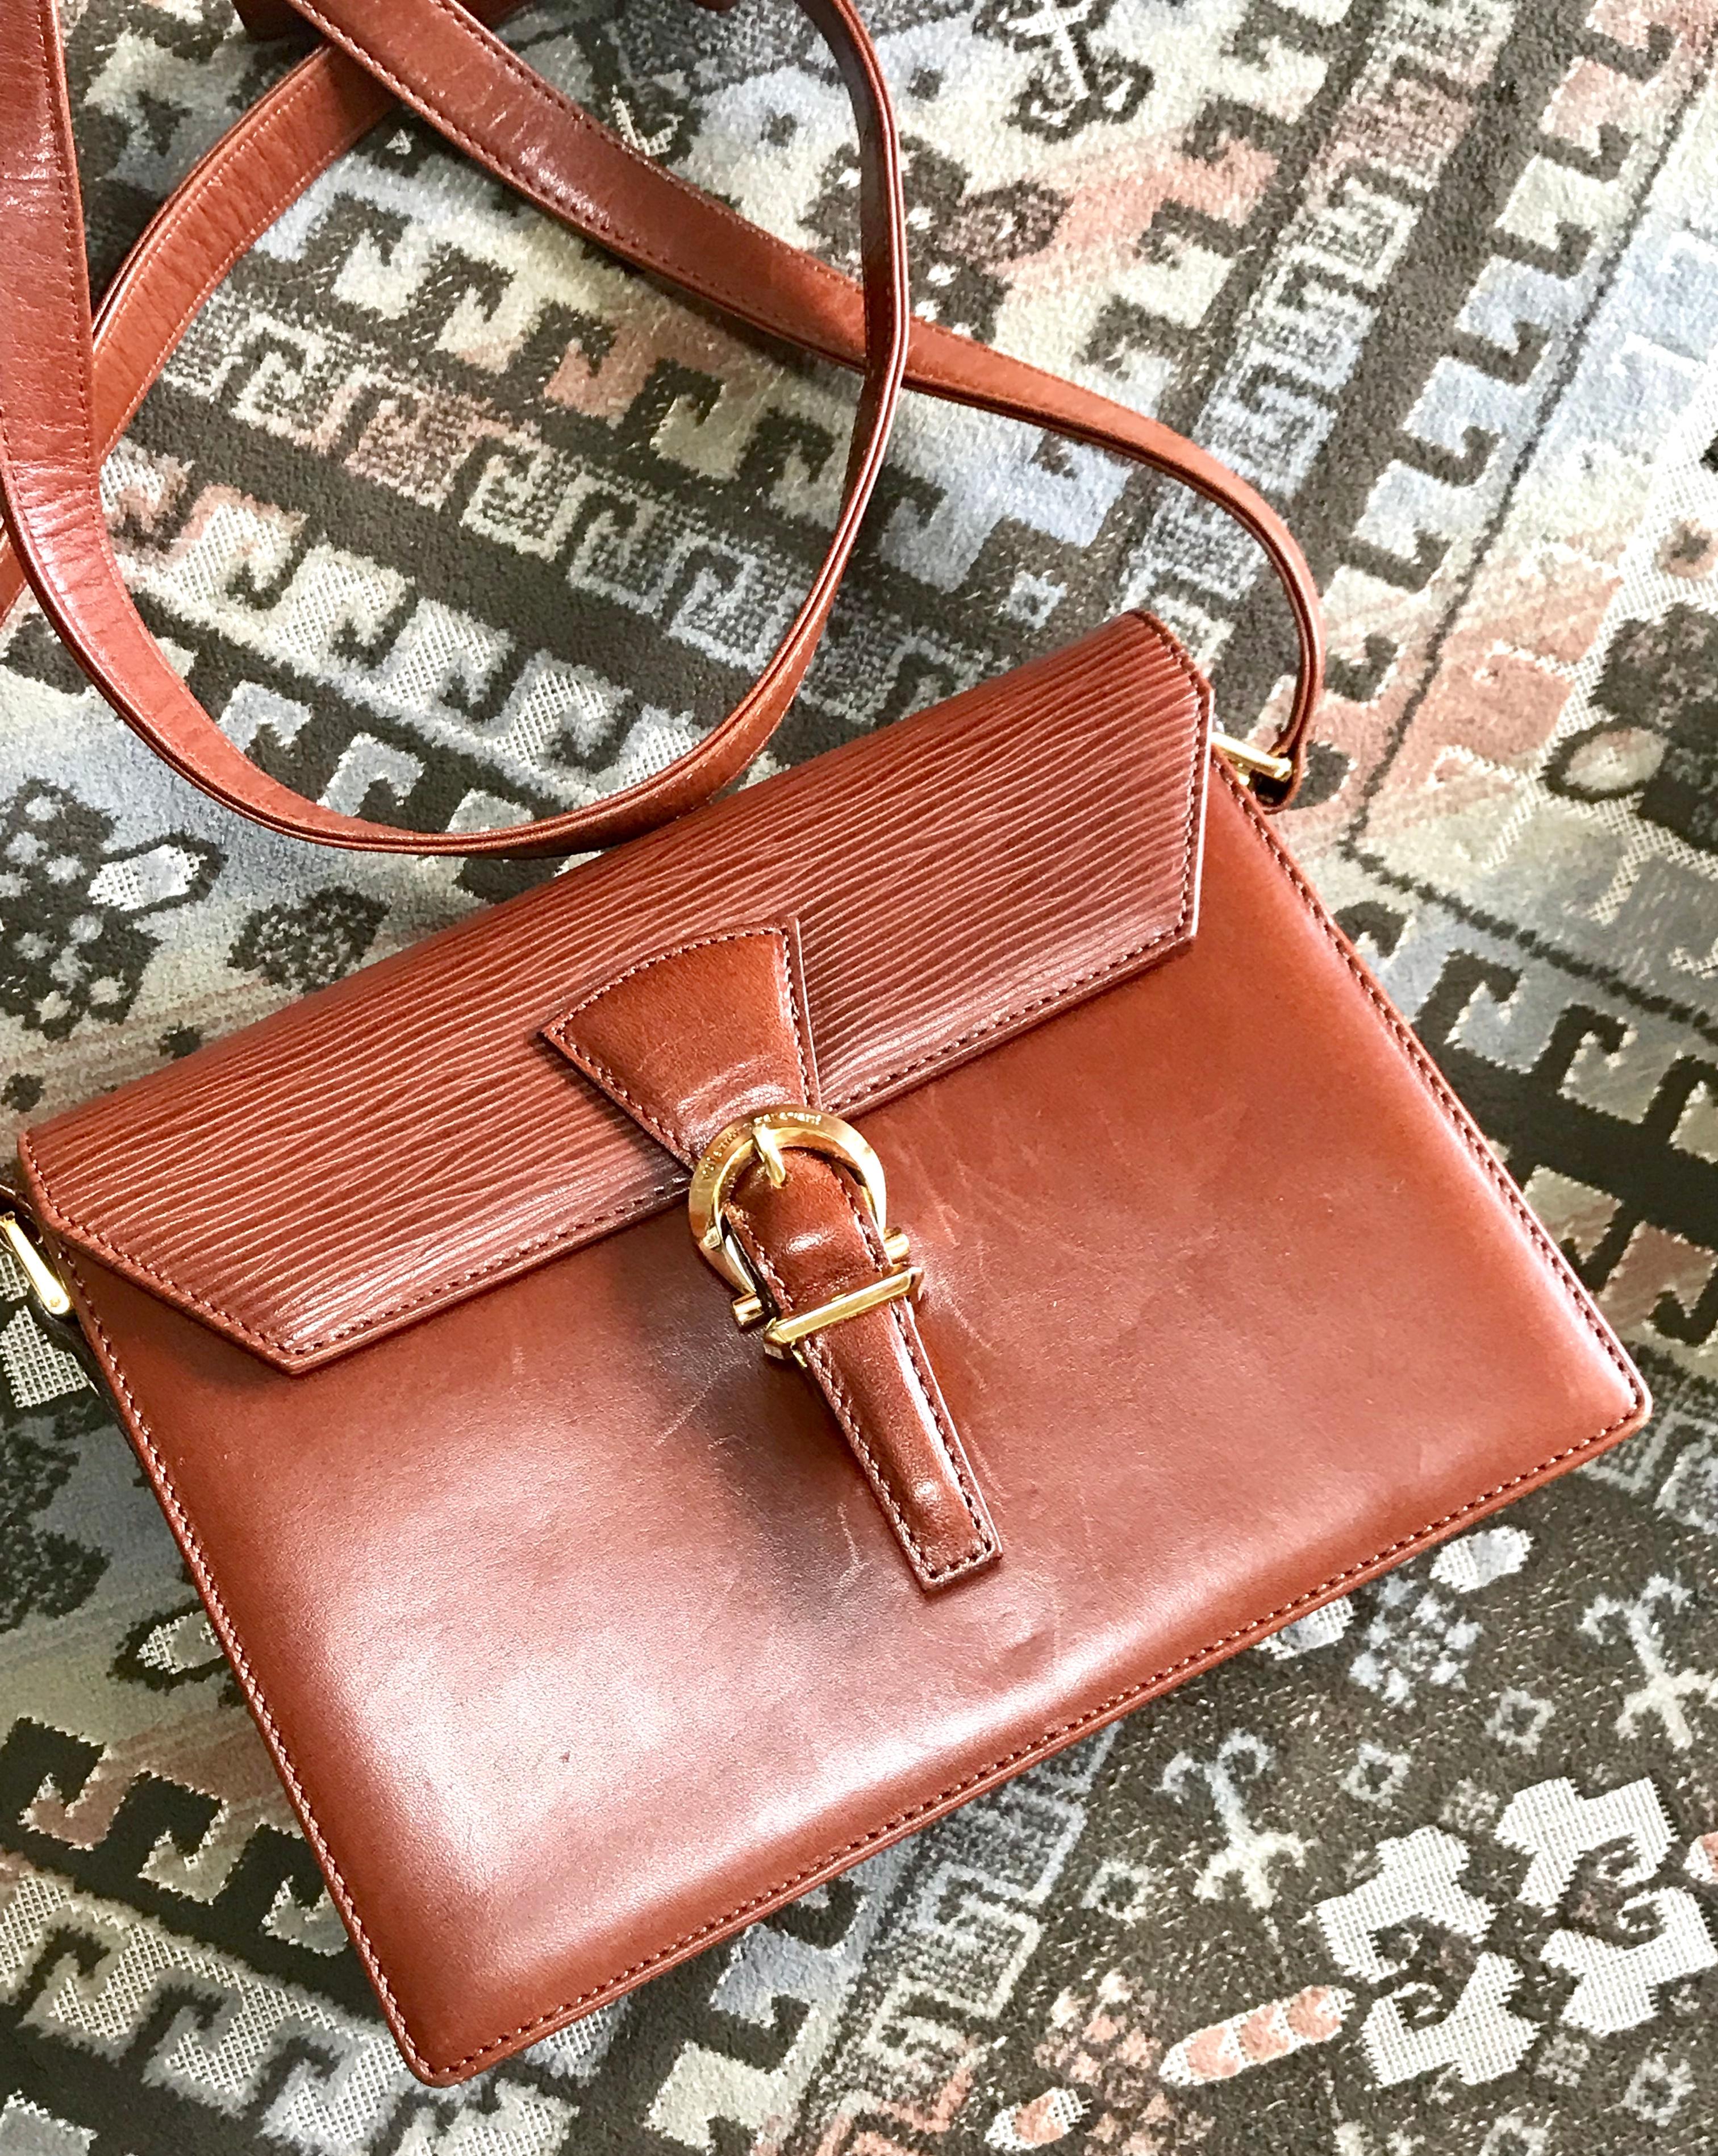 1990s. Vintage Valentino Garavani brown epi leather shoulder bag with golden logo buckle design closure. Classic Valentino purse for any occasions.

This is the vintage Valentino Garavani brown leather shoulder bag from approx. early-mid